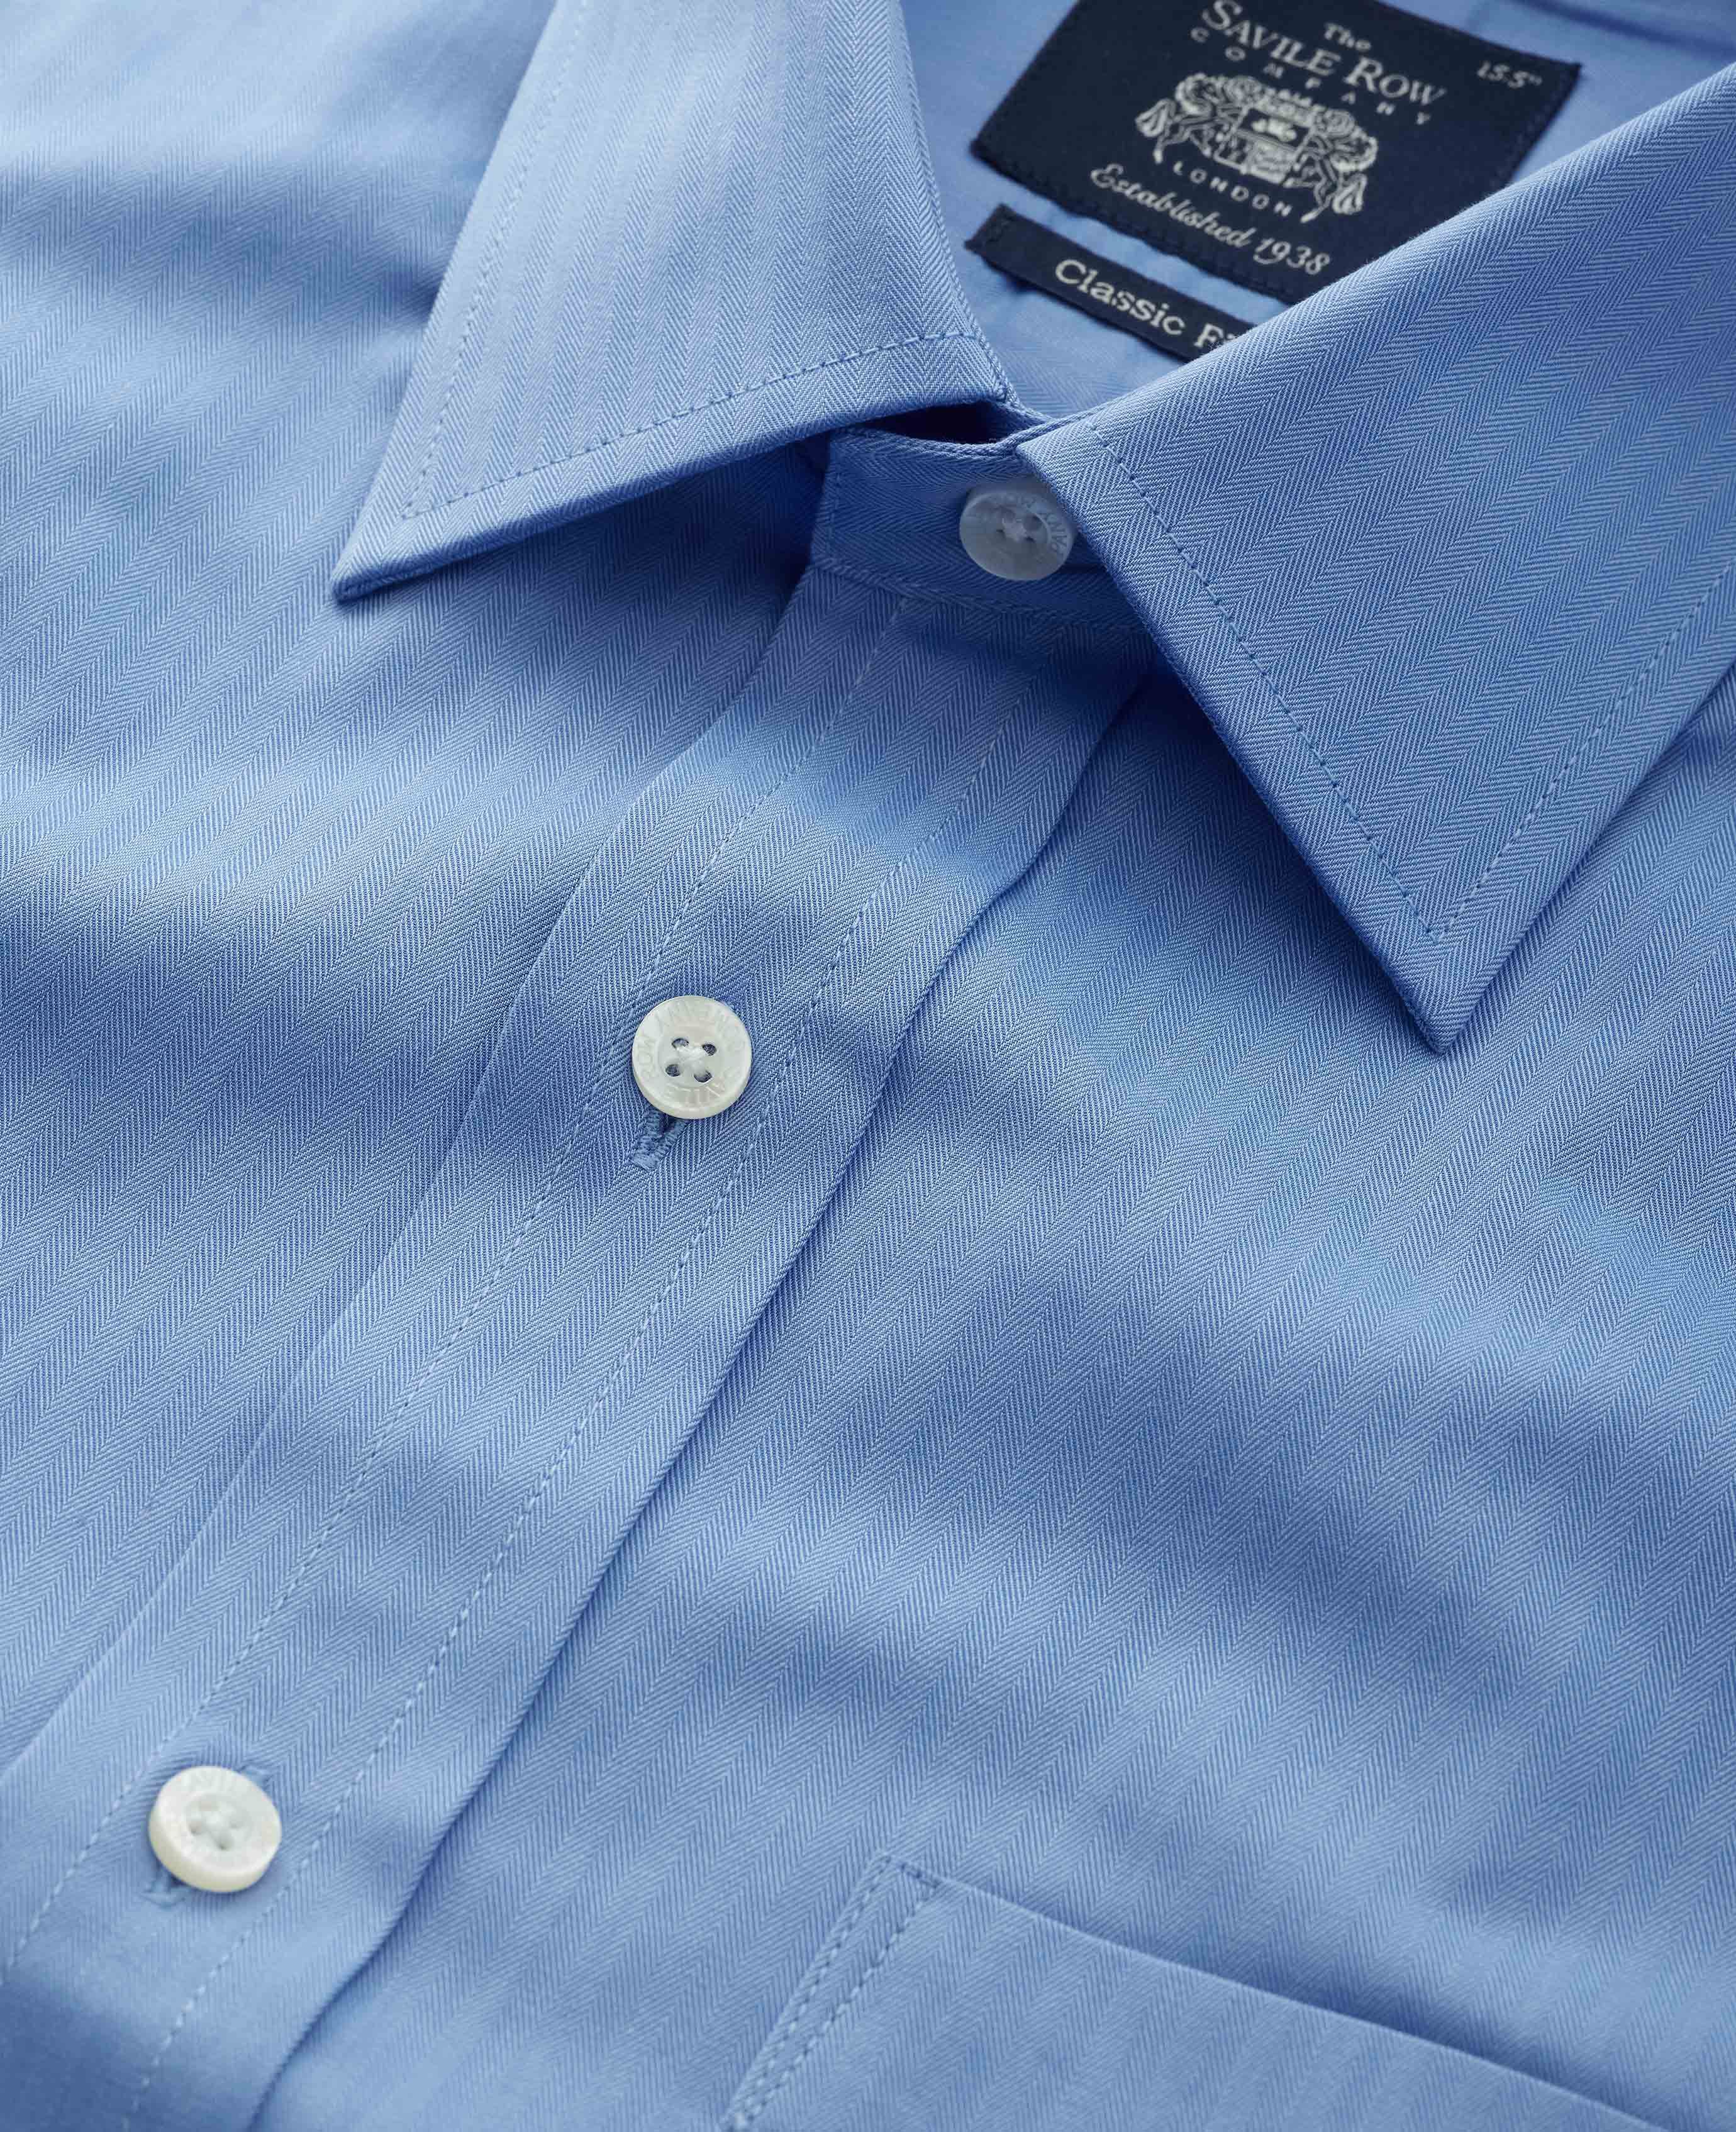 Men's Blue Herringbone Classic Fit Formal Shirt With Double Cuffs ...